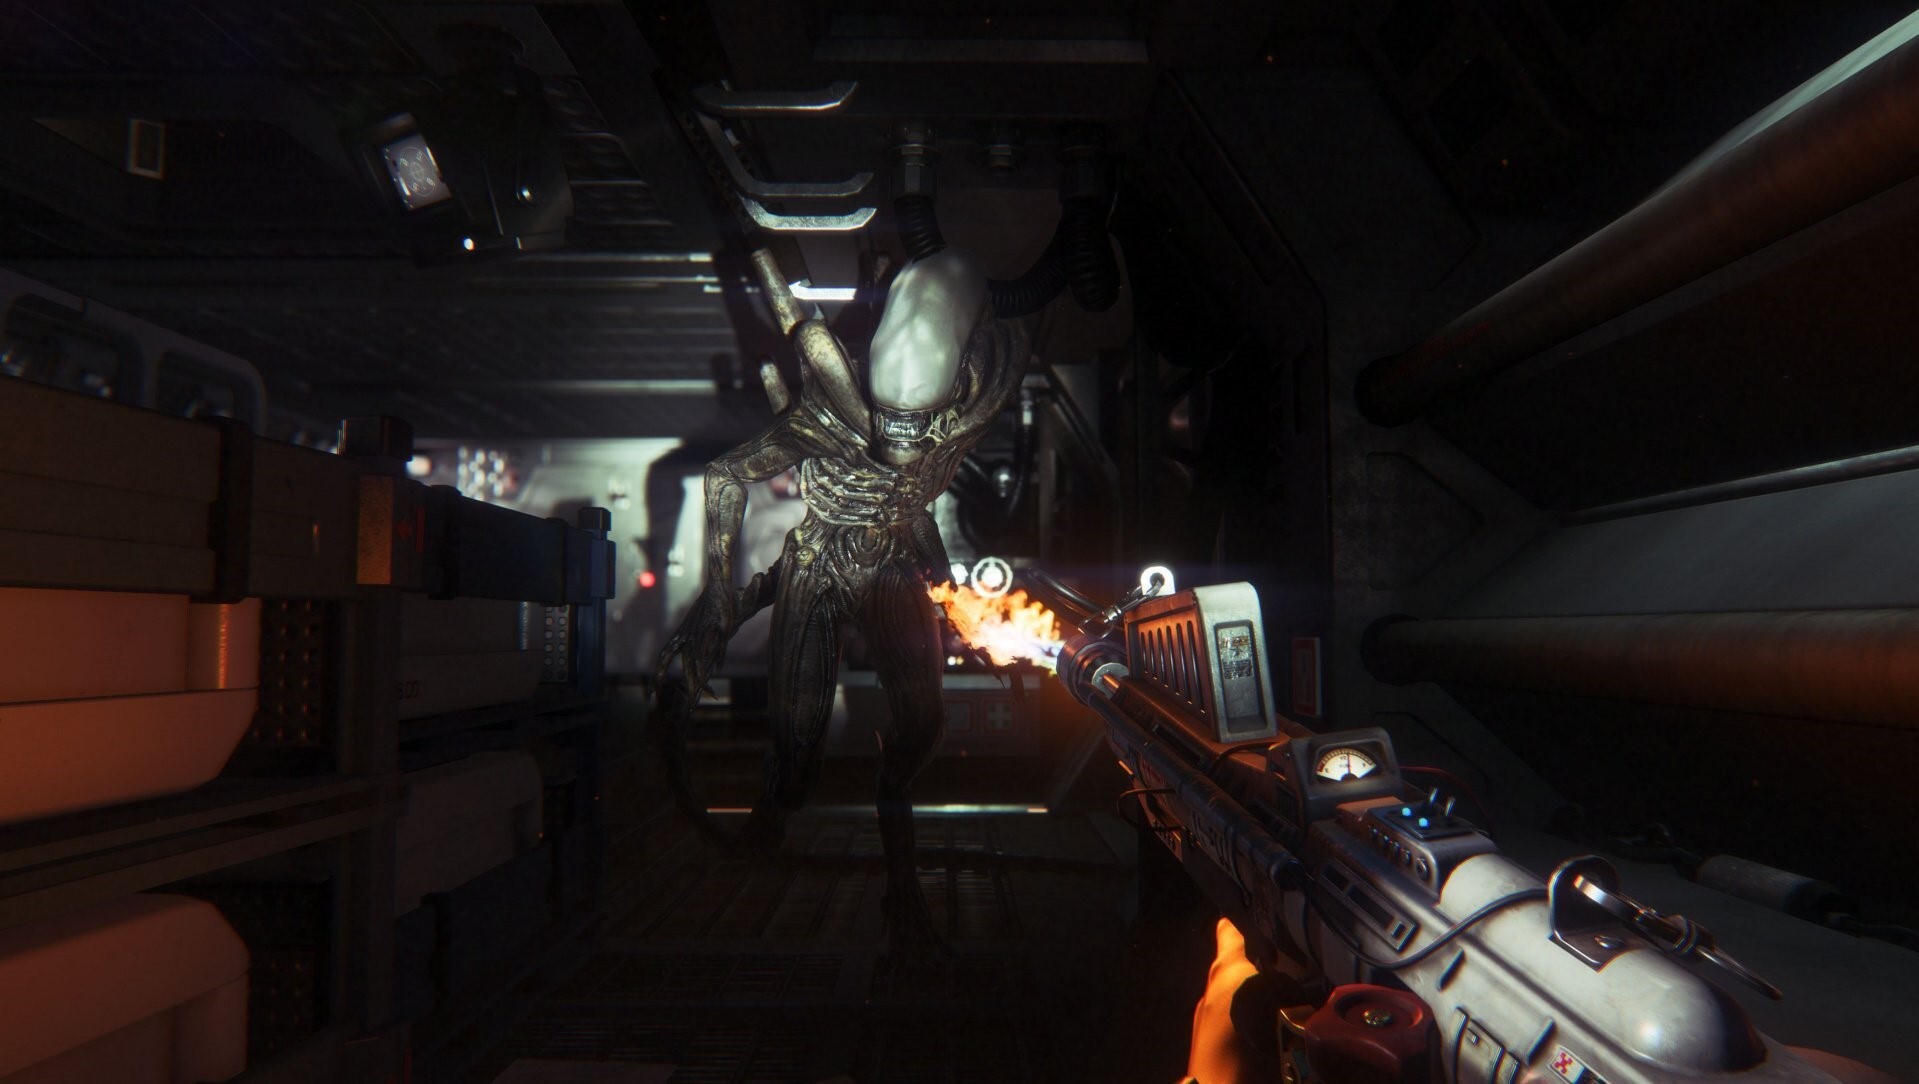 An Alien comes towards you as the player character opens fire in Alien Isolation